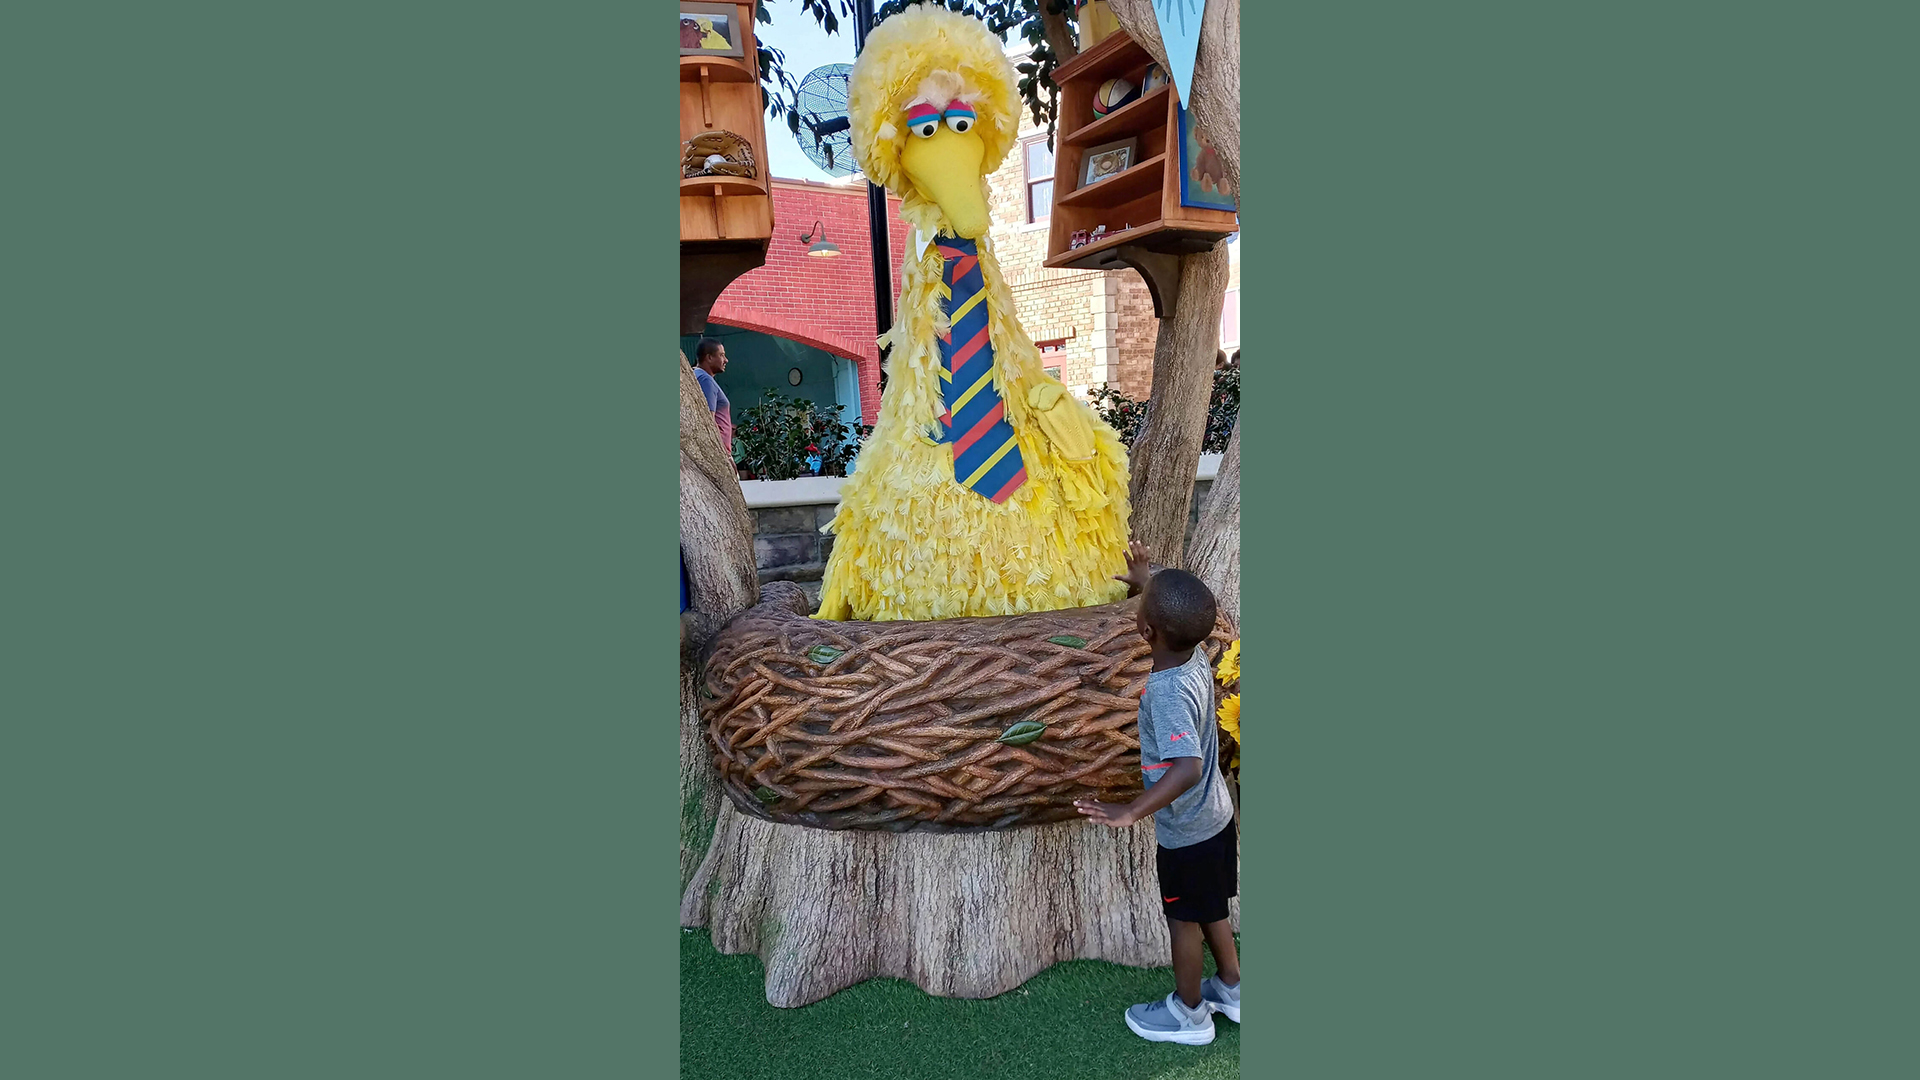 Parents Claim Their Black Son Was Ignored By Big Bird At A Sesame Street Theme Park